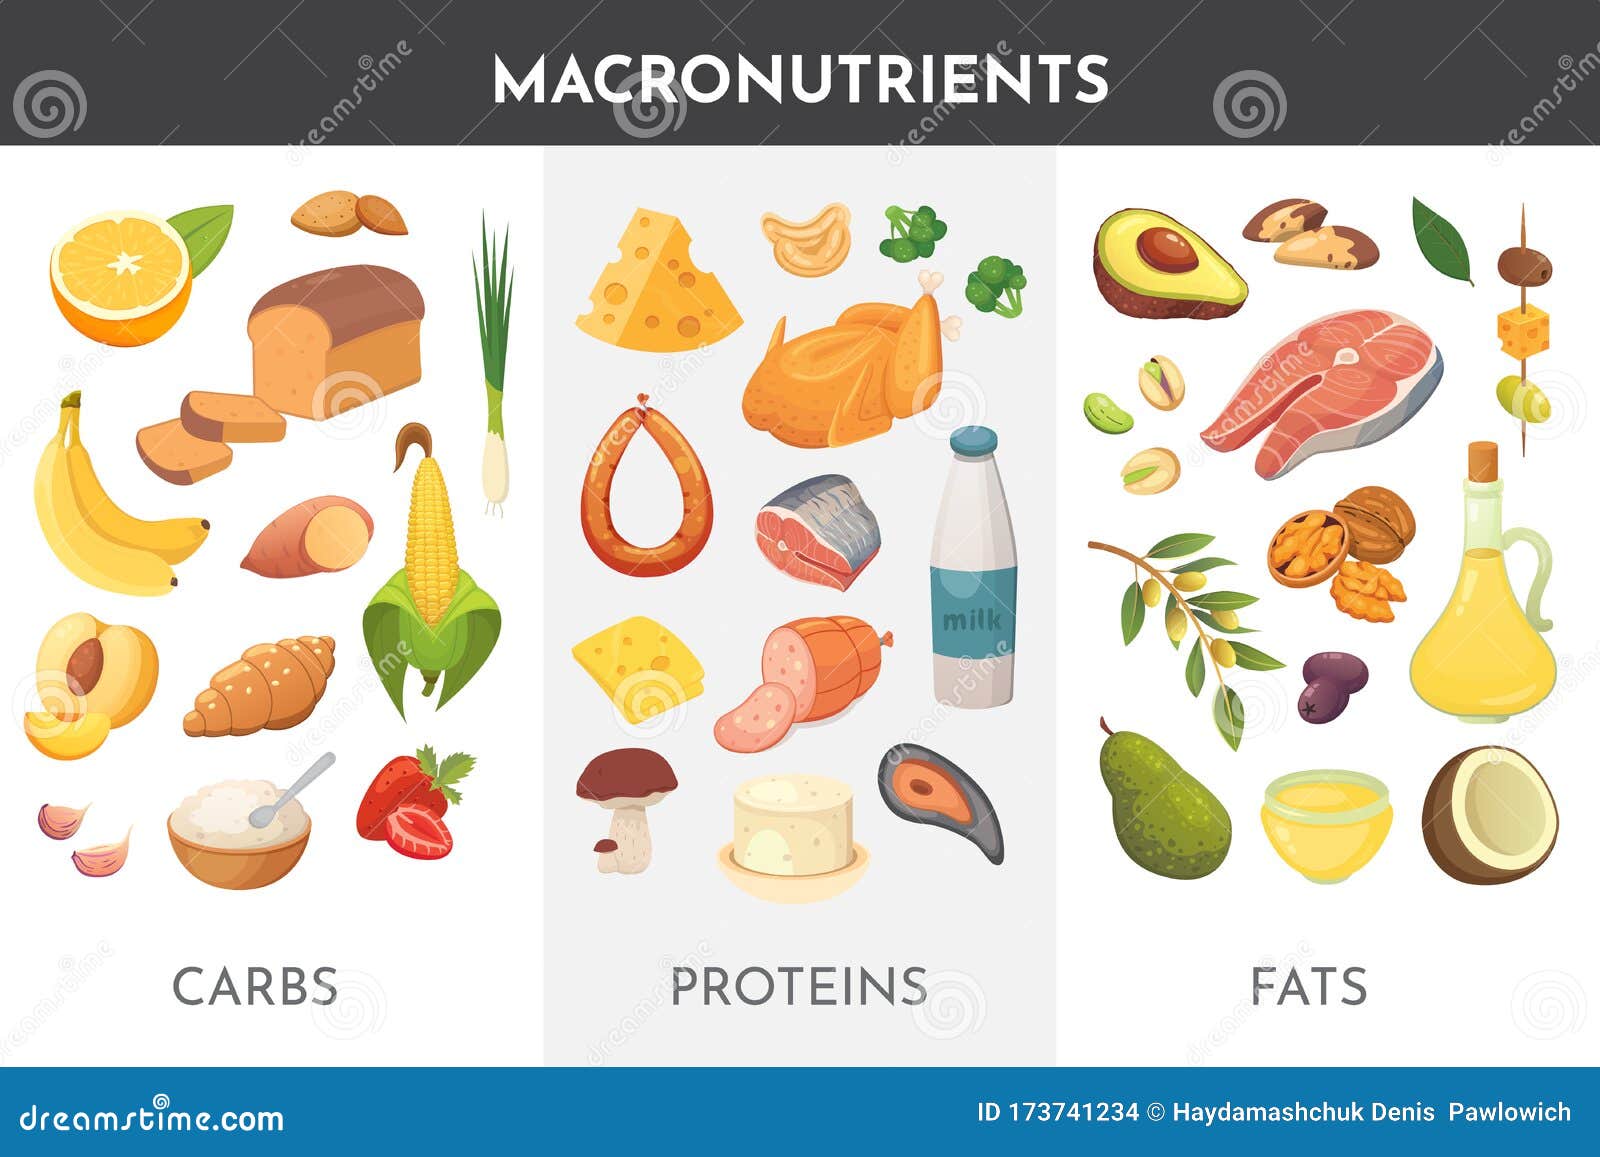 macronutrients  . main food groups : proteins, fats and carbohydrates. dieting, healthy eating concept